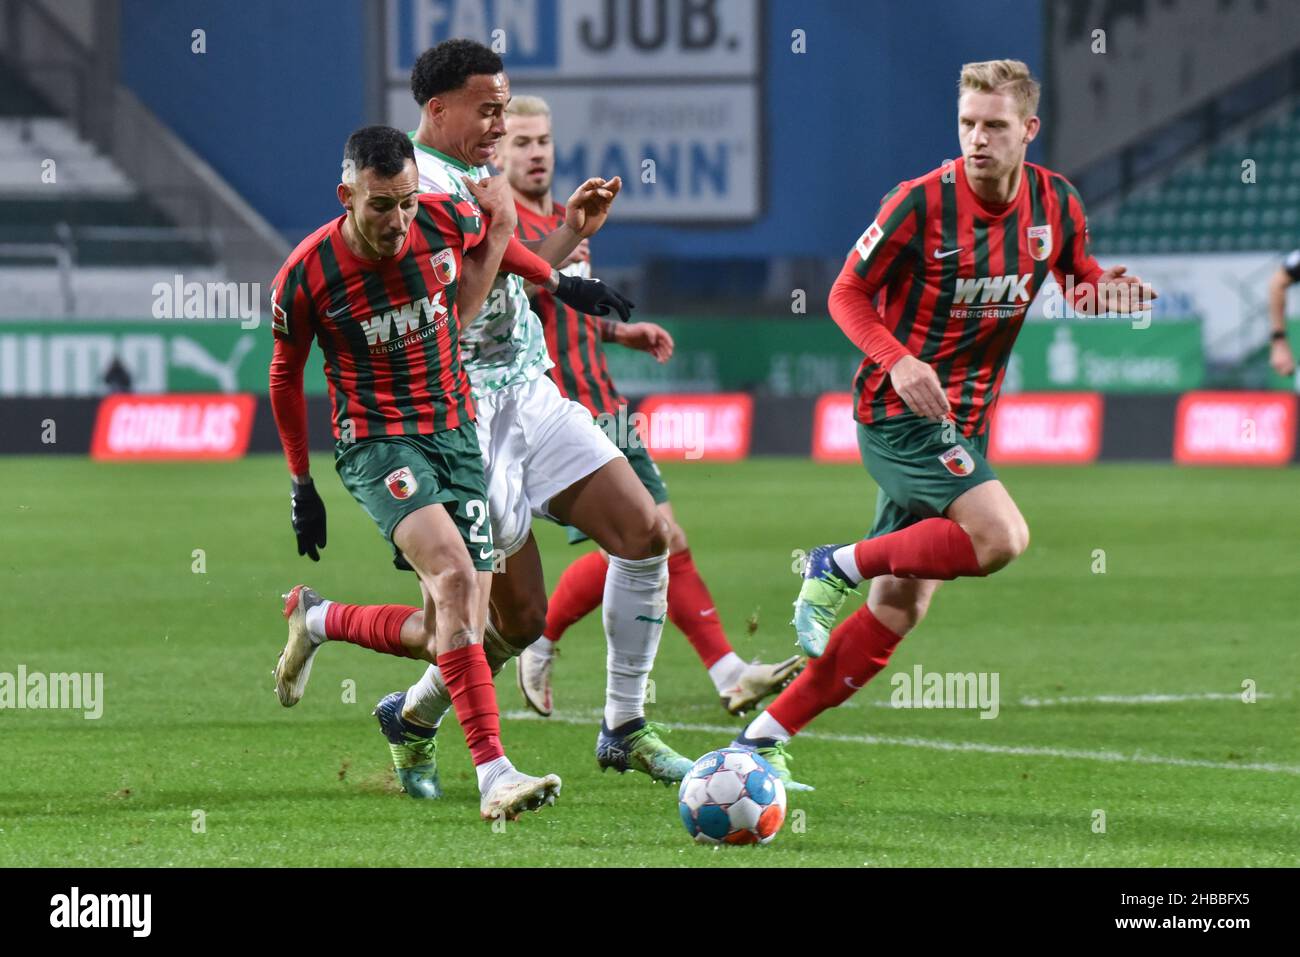 Fuerth, Germany. 18th Dec, 2021.  Fussball, 1.Bundesliga - SpVgg Greuther Fuerth vs. FC Augsburg  Image: (fLTR) Amaral Borduchi Lago (FC Augsburg, 22), Jamie Leweling (SpVgg Greuther Fürth,40)  DFL regulations prohibit any use of photographs as image sequences and or quasi-video Credit: Ryan Evans/Alamy Live News Stock Photo